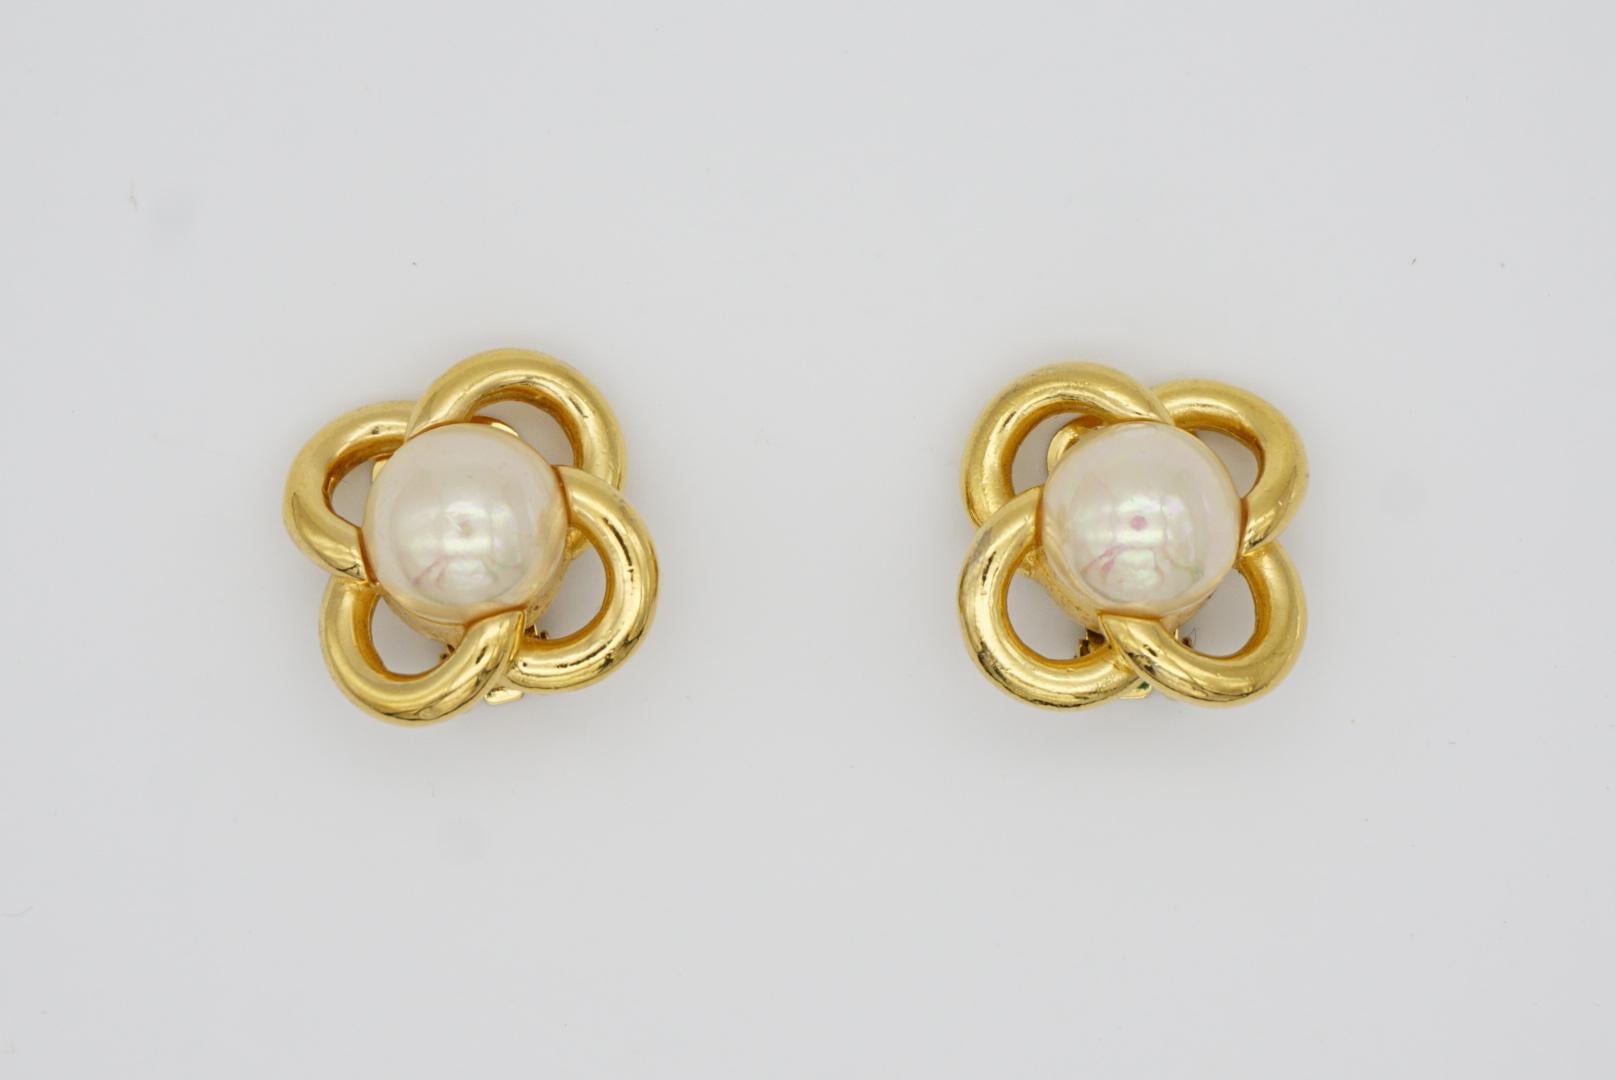 Christian Dior Vintage 1980s Flower White Round Pearl Interlock Clip Earrings For Sale 2